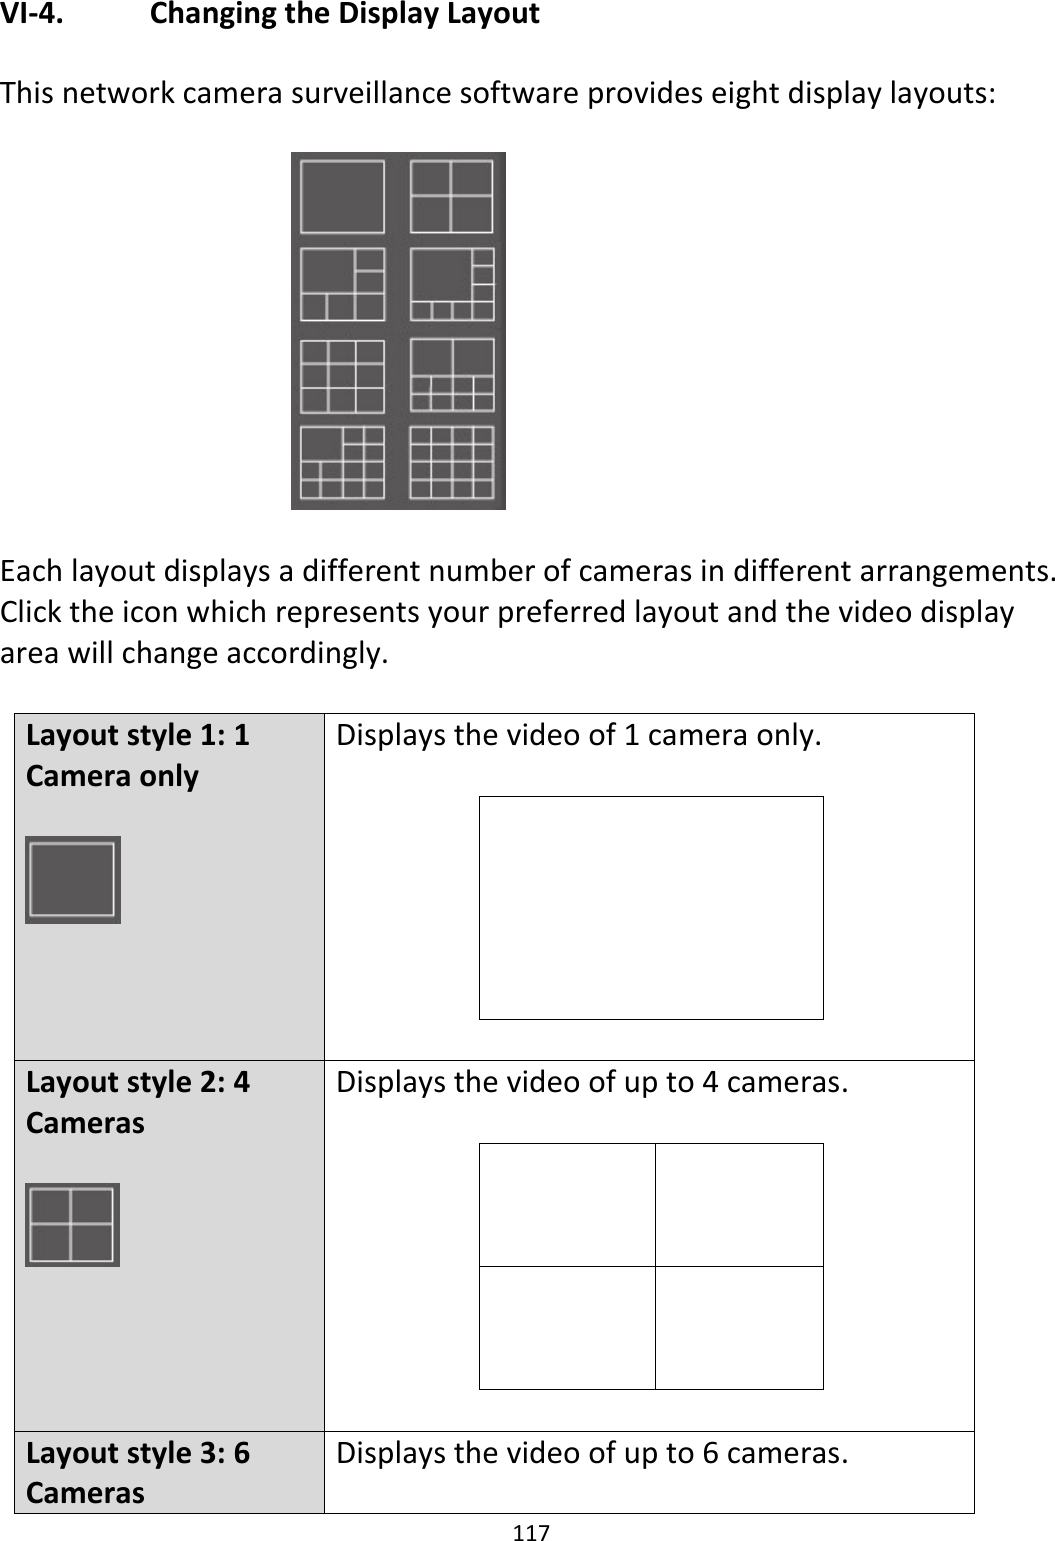 117  VI-4.    Changing the Display Layout  This network camera surveillance software provides eight display layouts:    Each layout displays a different number of cameras in different arrangements. Click the icon which represents your preferred layout and the video display area will change accordingly.  Layout style 1: 1 Camera only   Displays the video of 1 camera only.       Layout style 2: 4 Cameras   Displays the video of up to 4 cameras.             Layout style 3: 6 Cameras Displays the video of up to 6 cameras.  